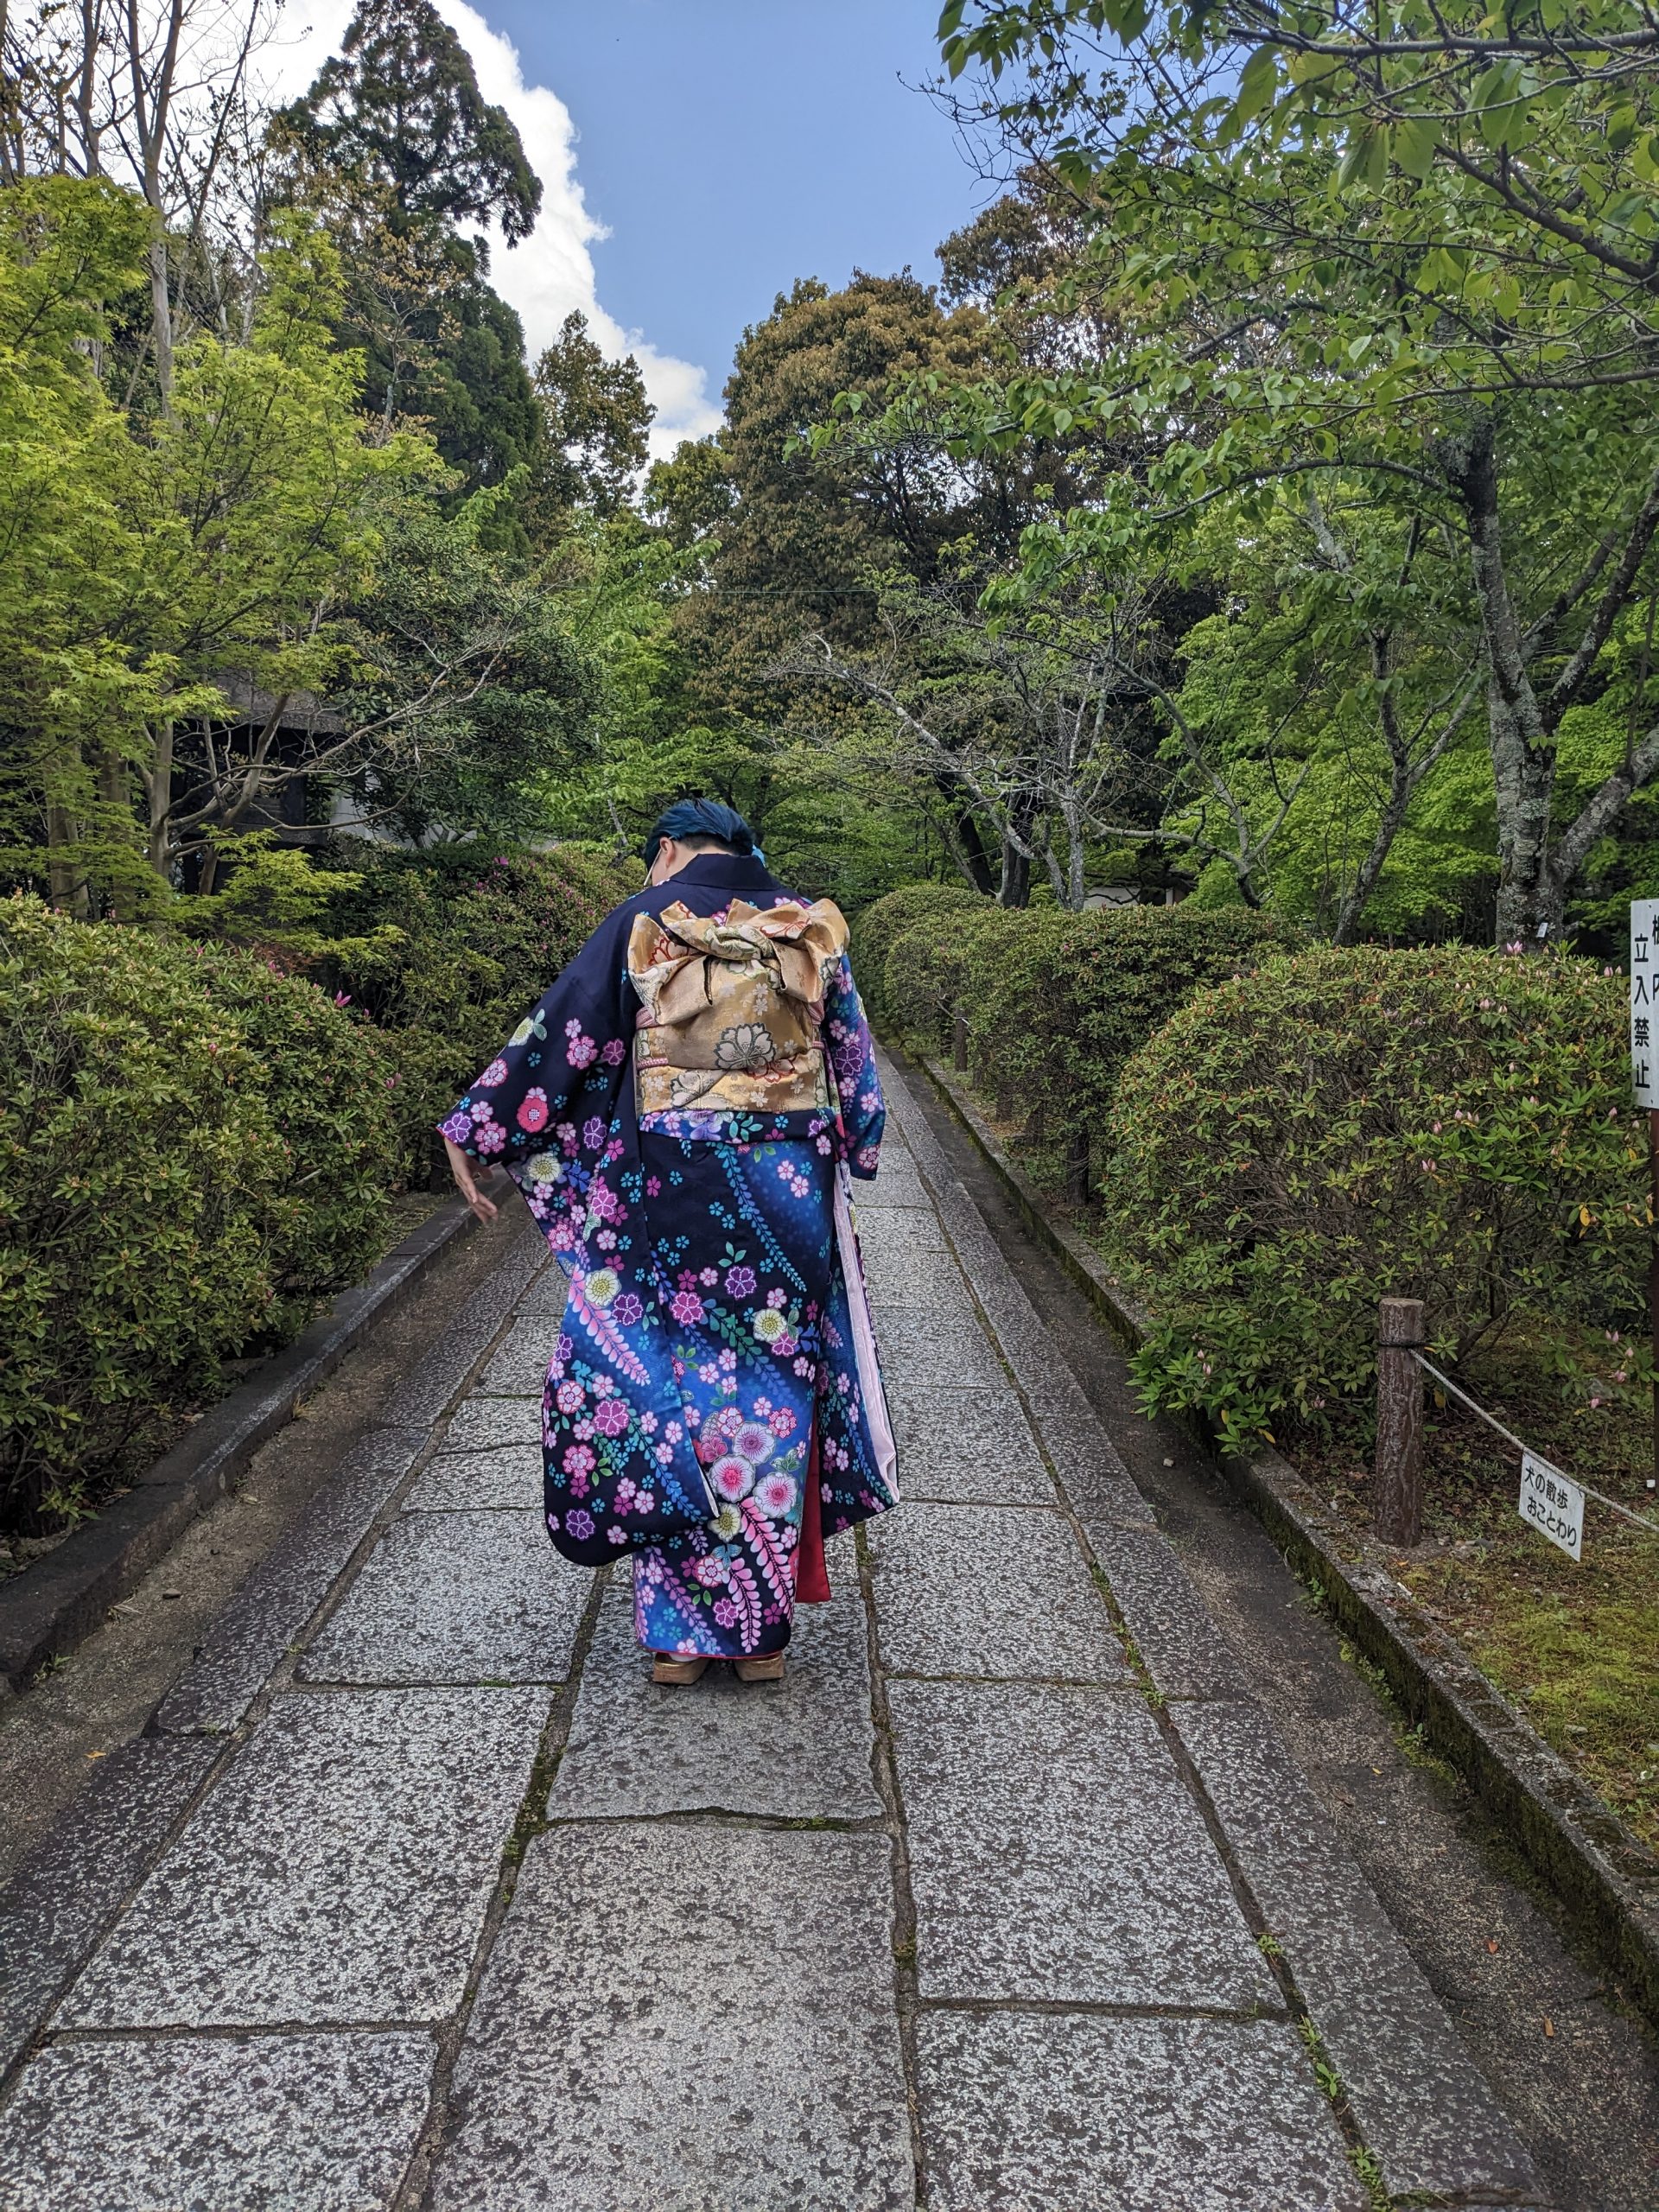 A girl wearing a kimono has her back turned towards the camera.